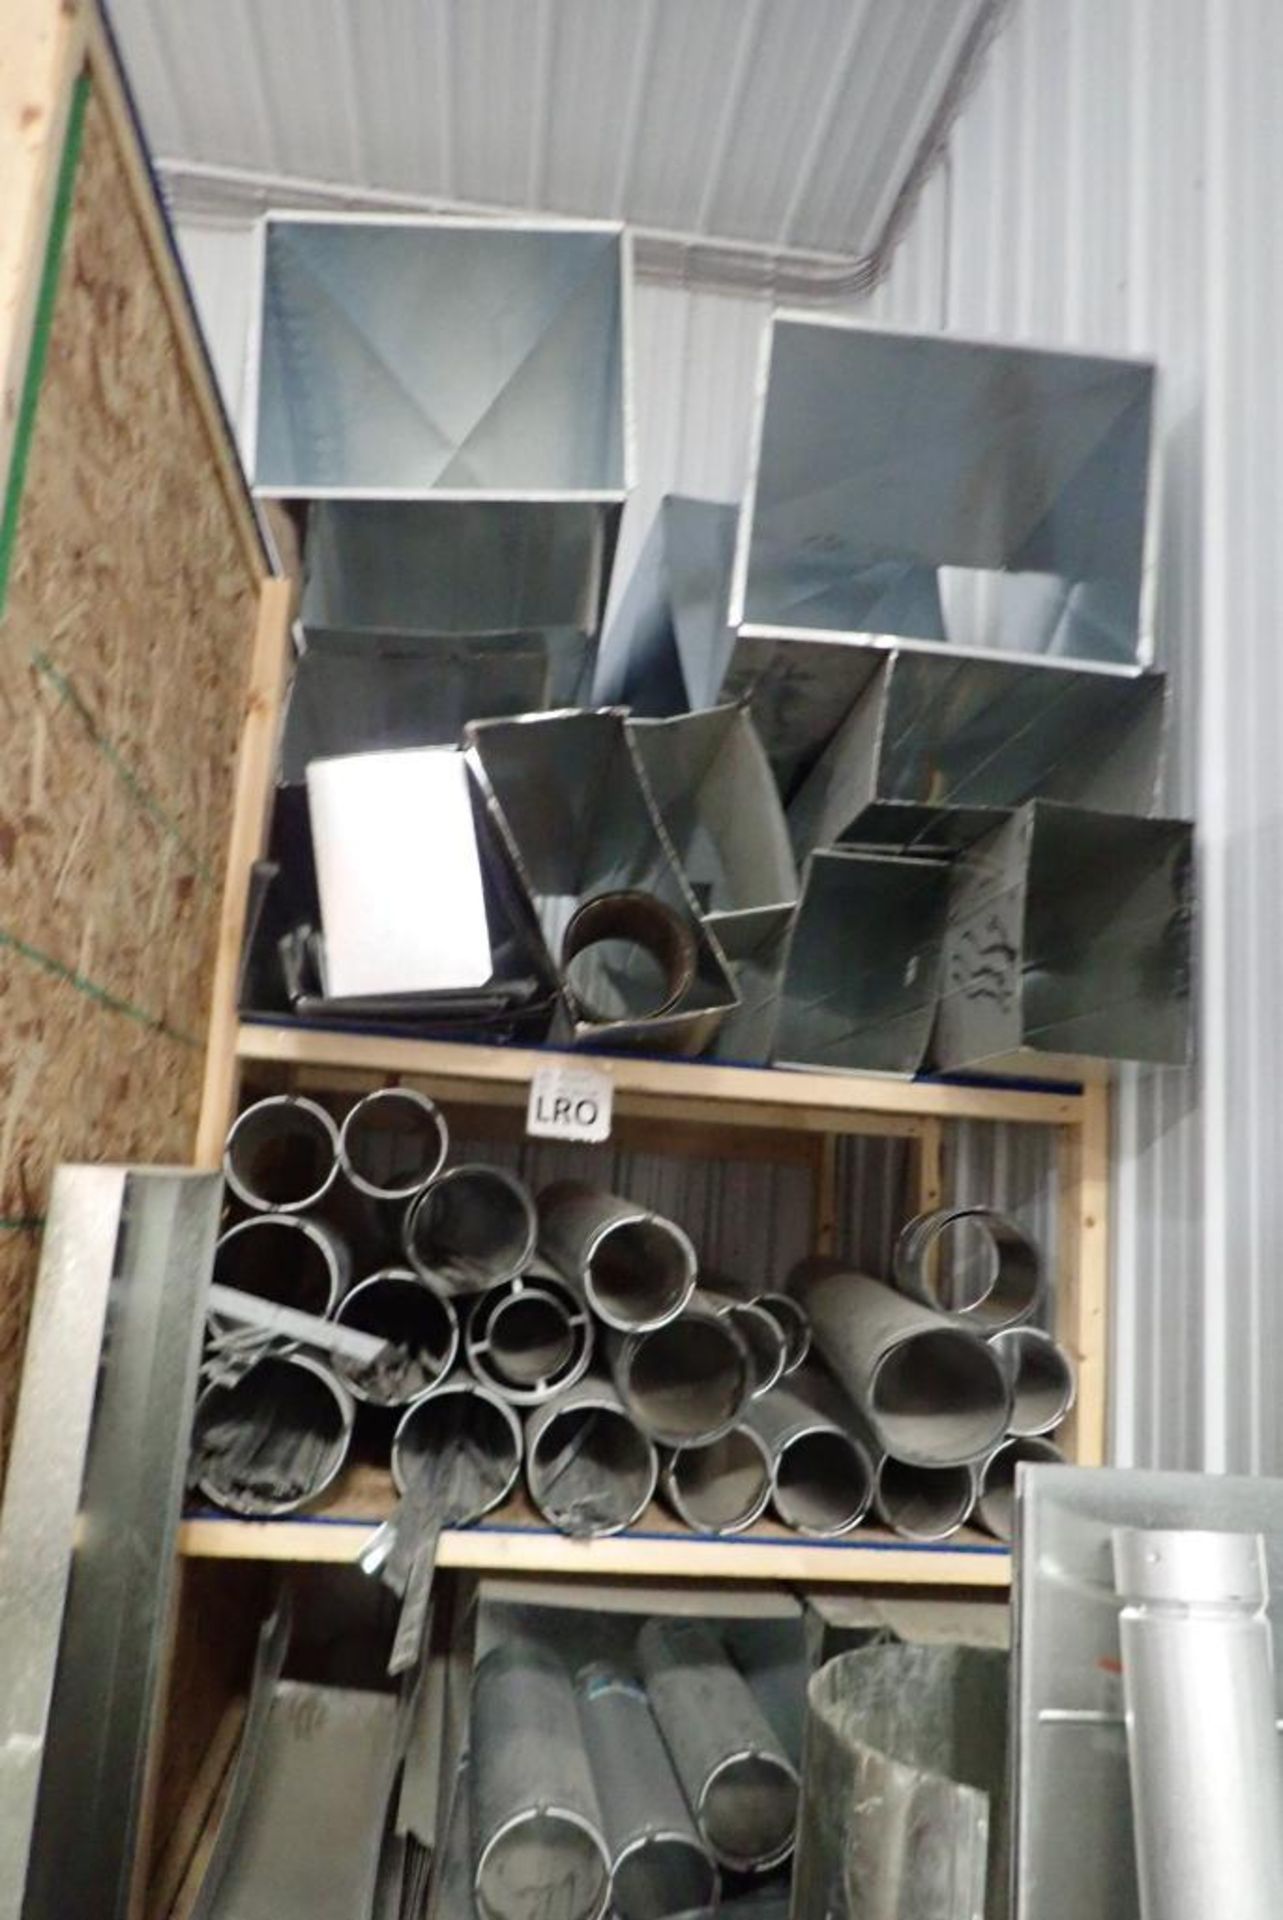 Contents of Pallet Racking inc. Ducting, Raw Tin, Furnace Fittings, etc. - Image 13 of 13